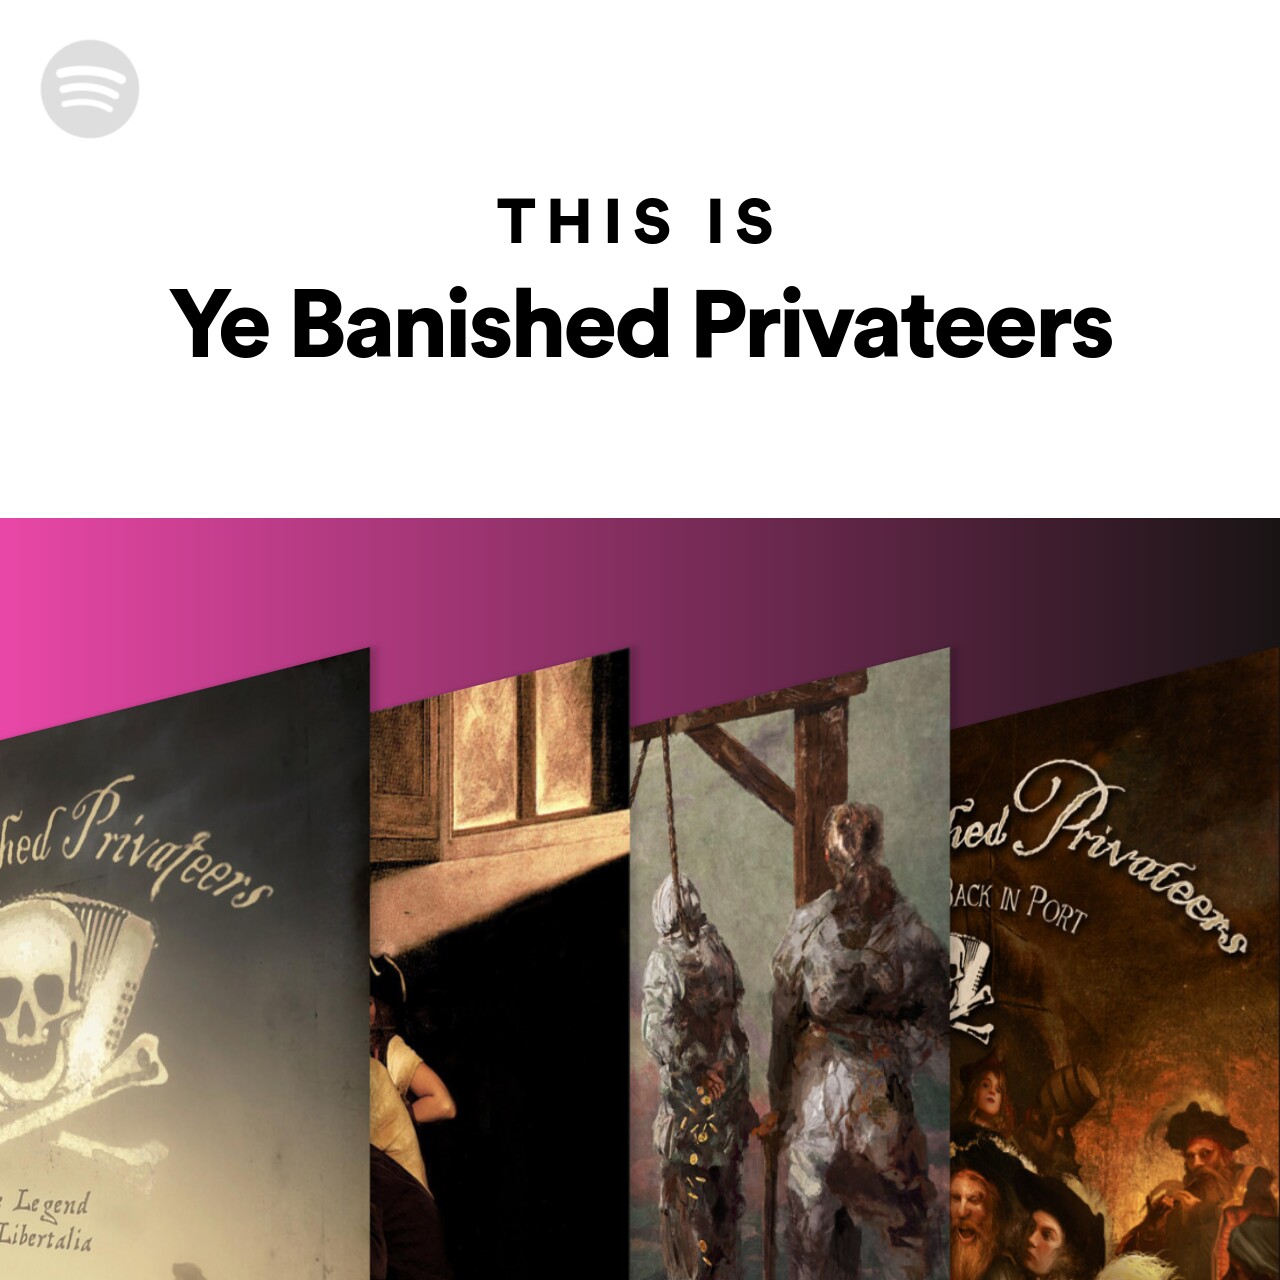 This Is Ye Banished Privateers